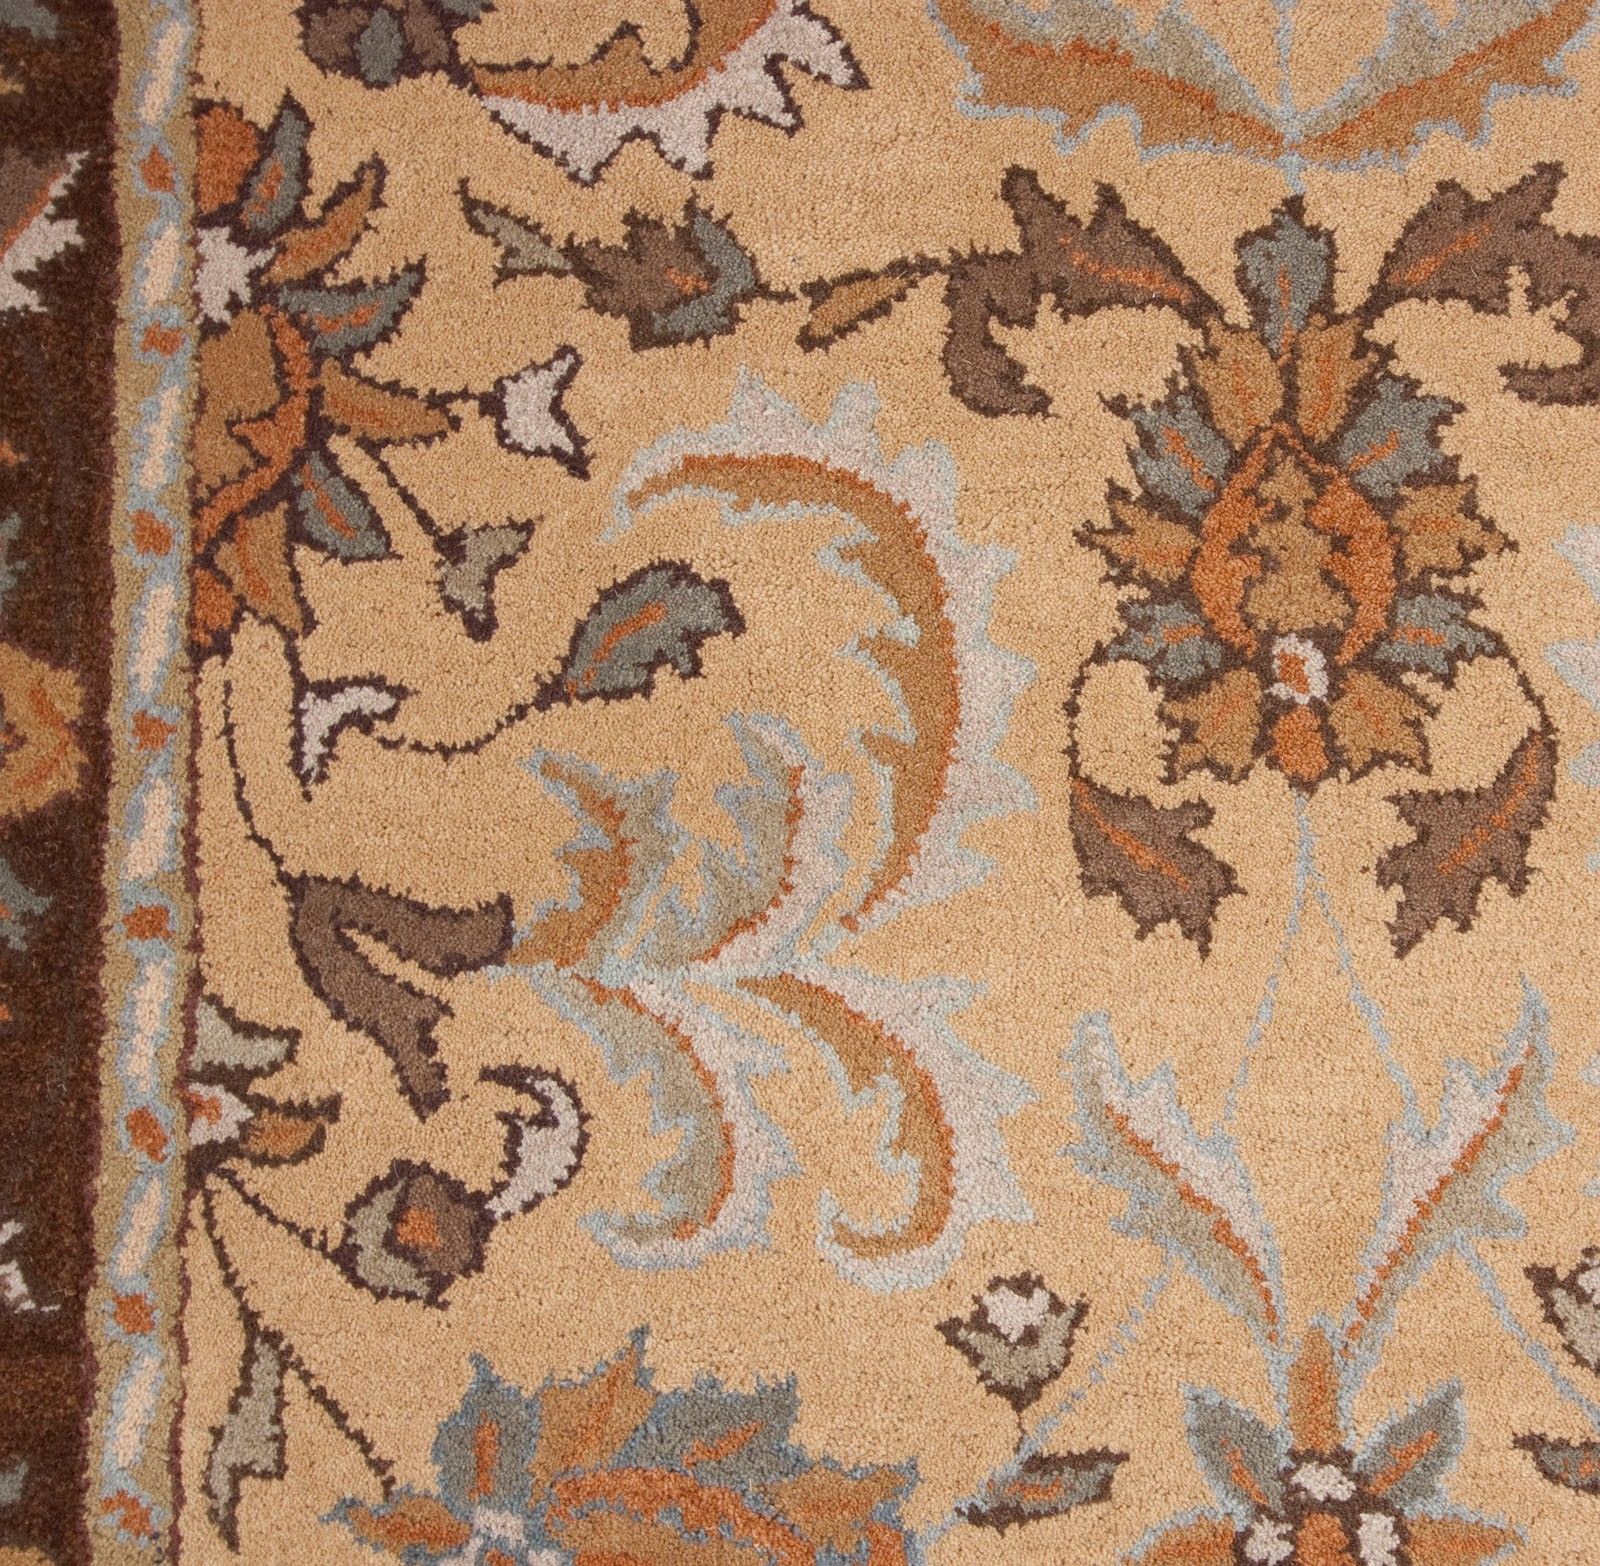 Wool Area Rugs Dunes Collection Candler Wool Area Rug Kinder Intended For Traditional Wool Area Rugs (View 8 of 15)